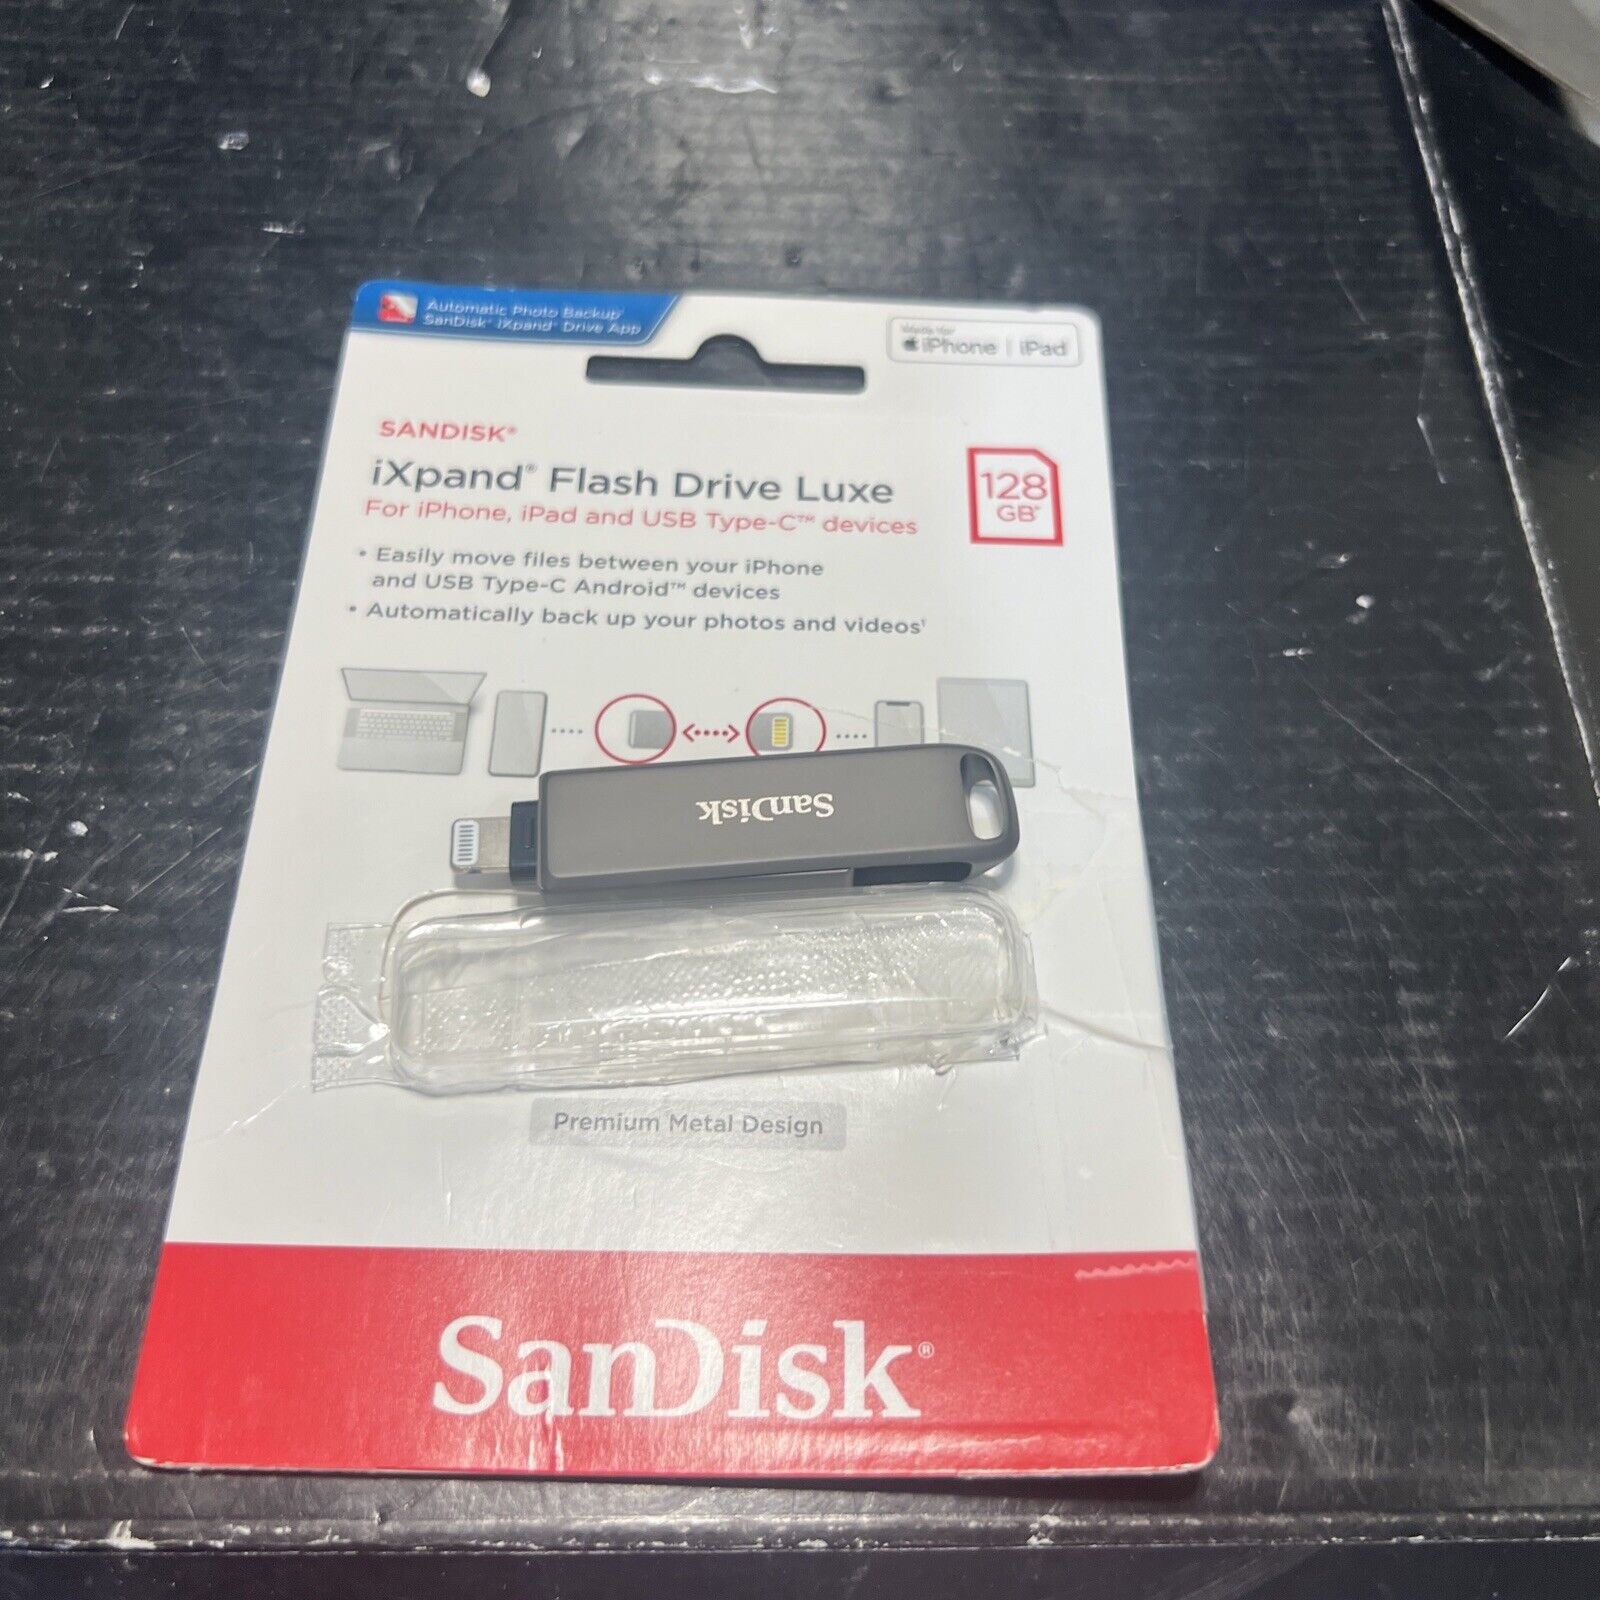 SanDisk 128GB iXpand Flash Drive Luxe for Your iPhone and USB Type-C Devices 